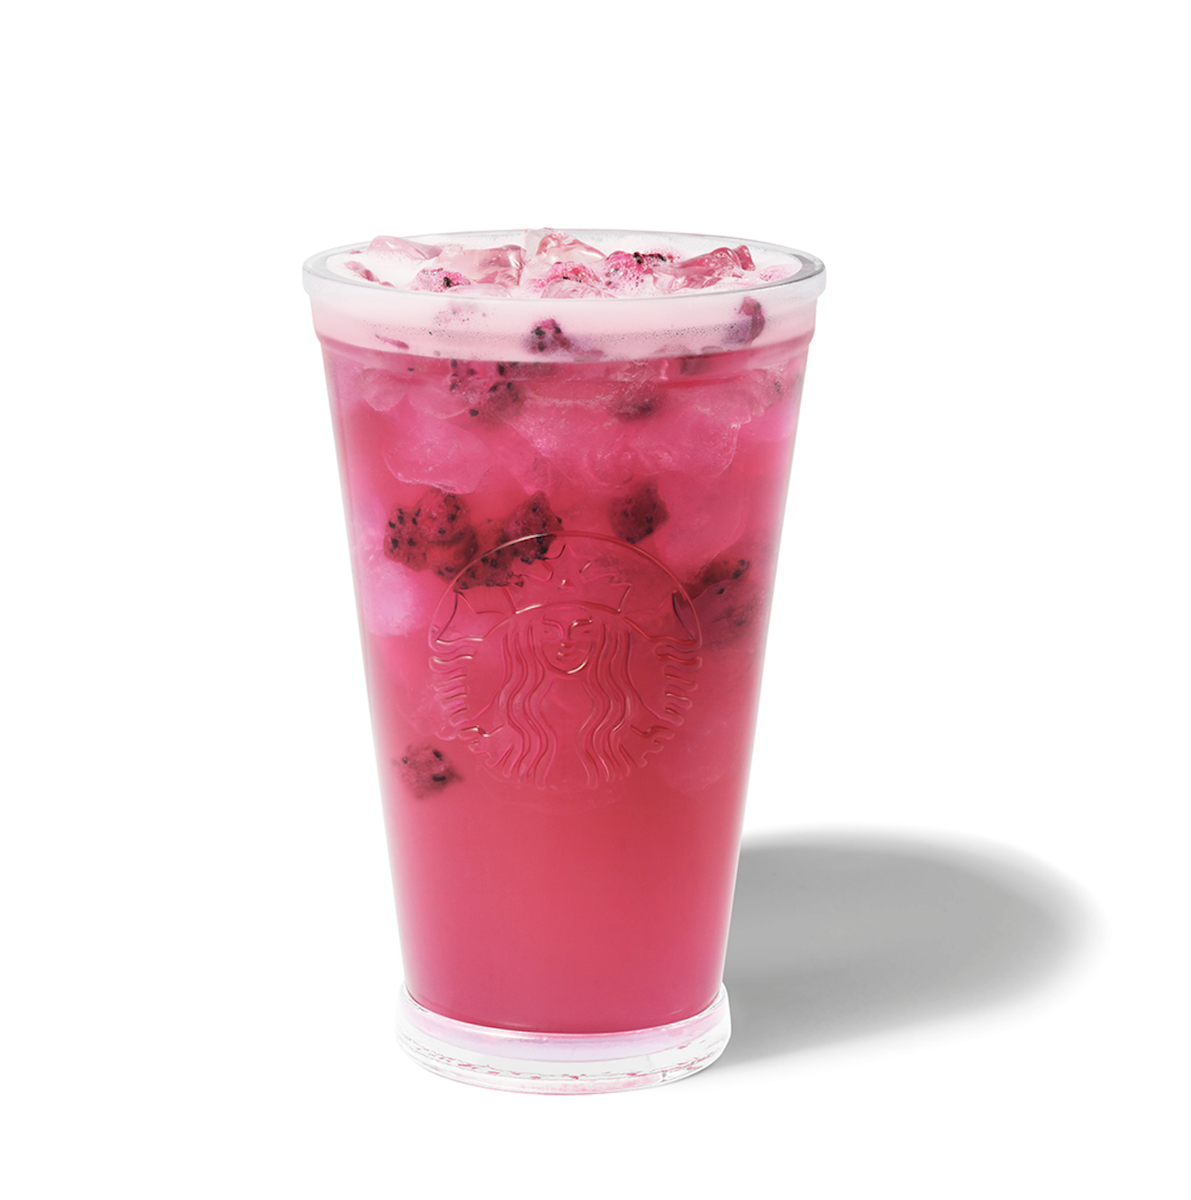 starbucks' new summer menu is here and we want to try everything